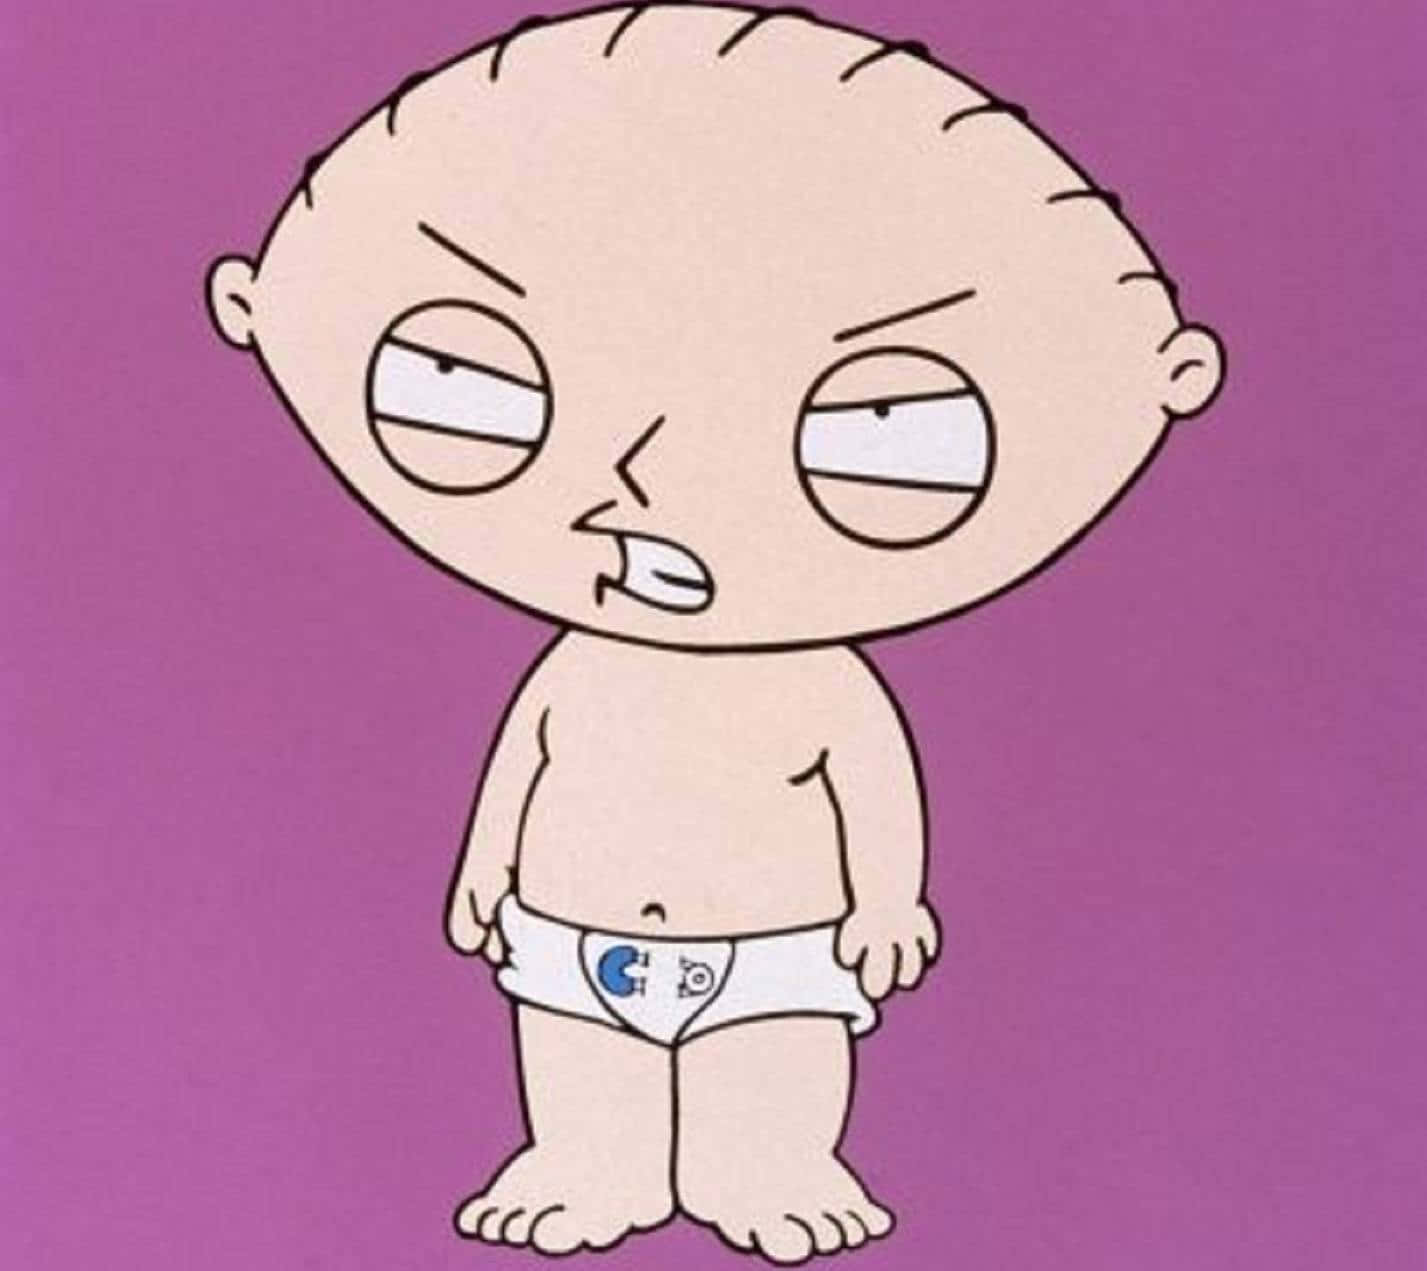 A Cartoon Baby With A Diaper On His Face